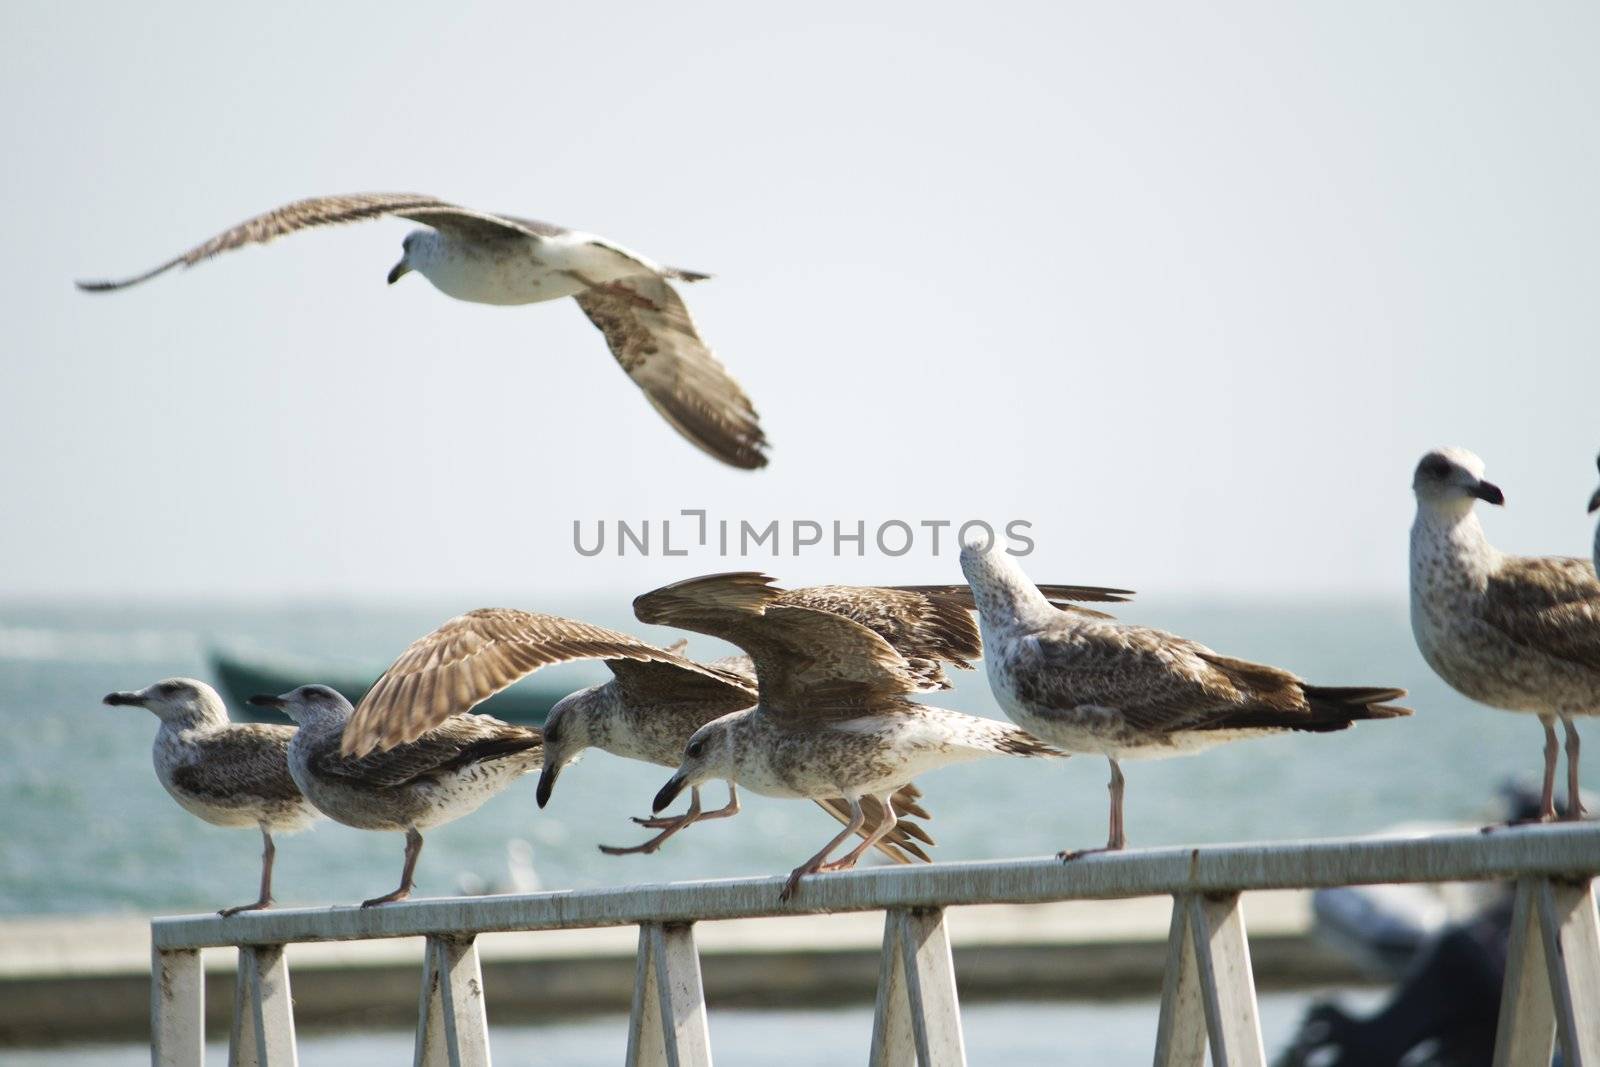 View of a group of seagulls standing along a pier.